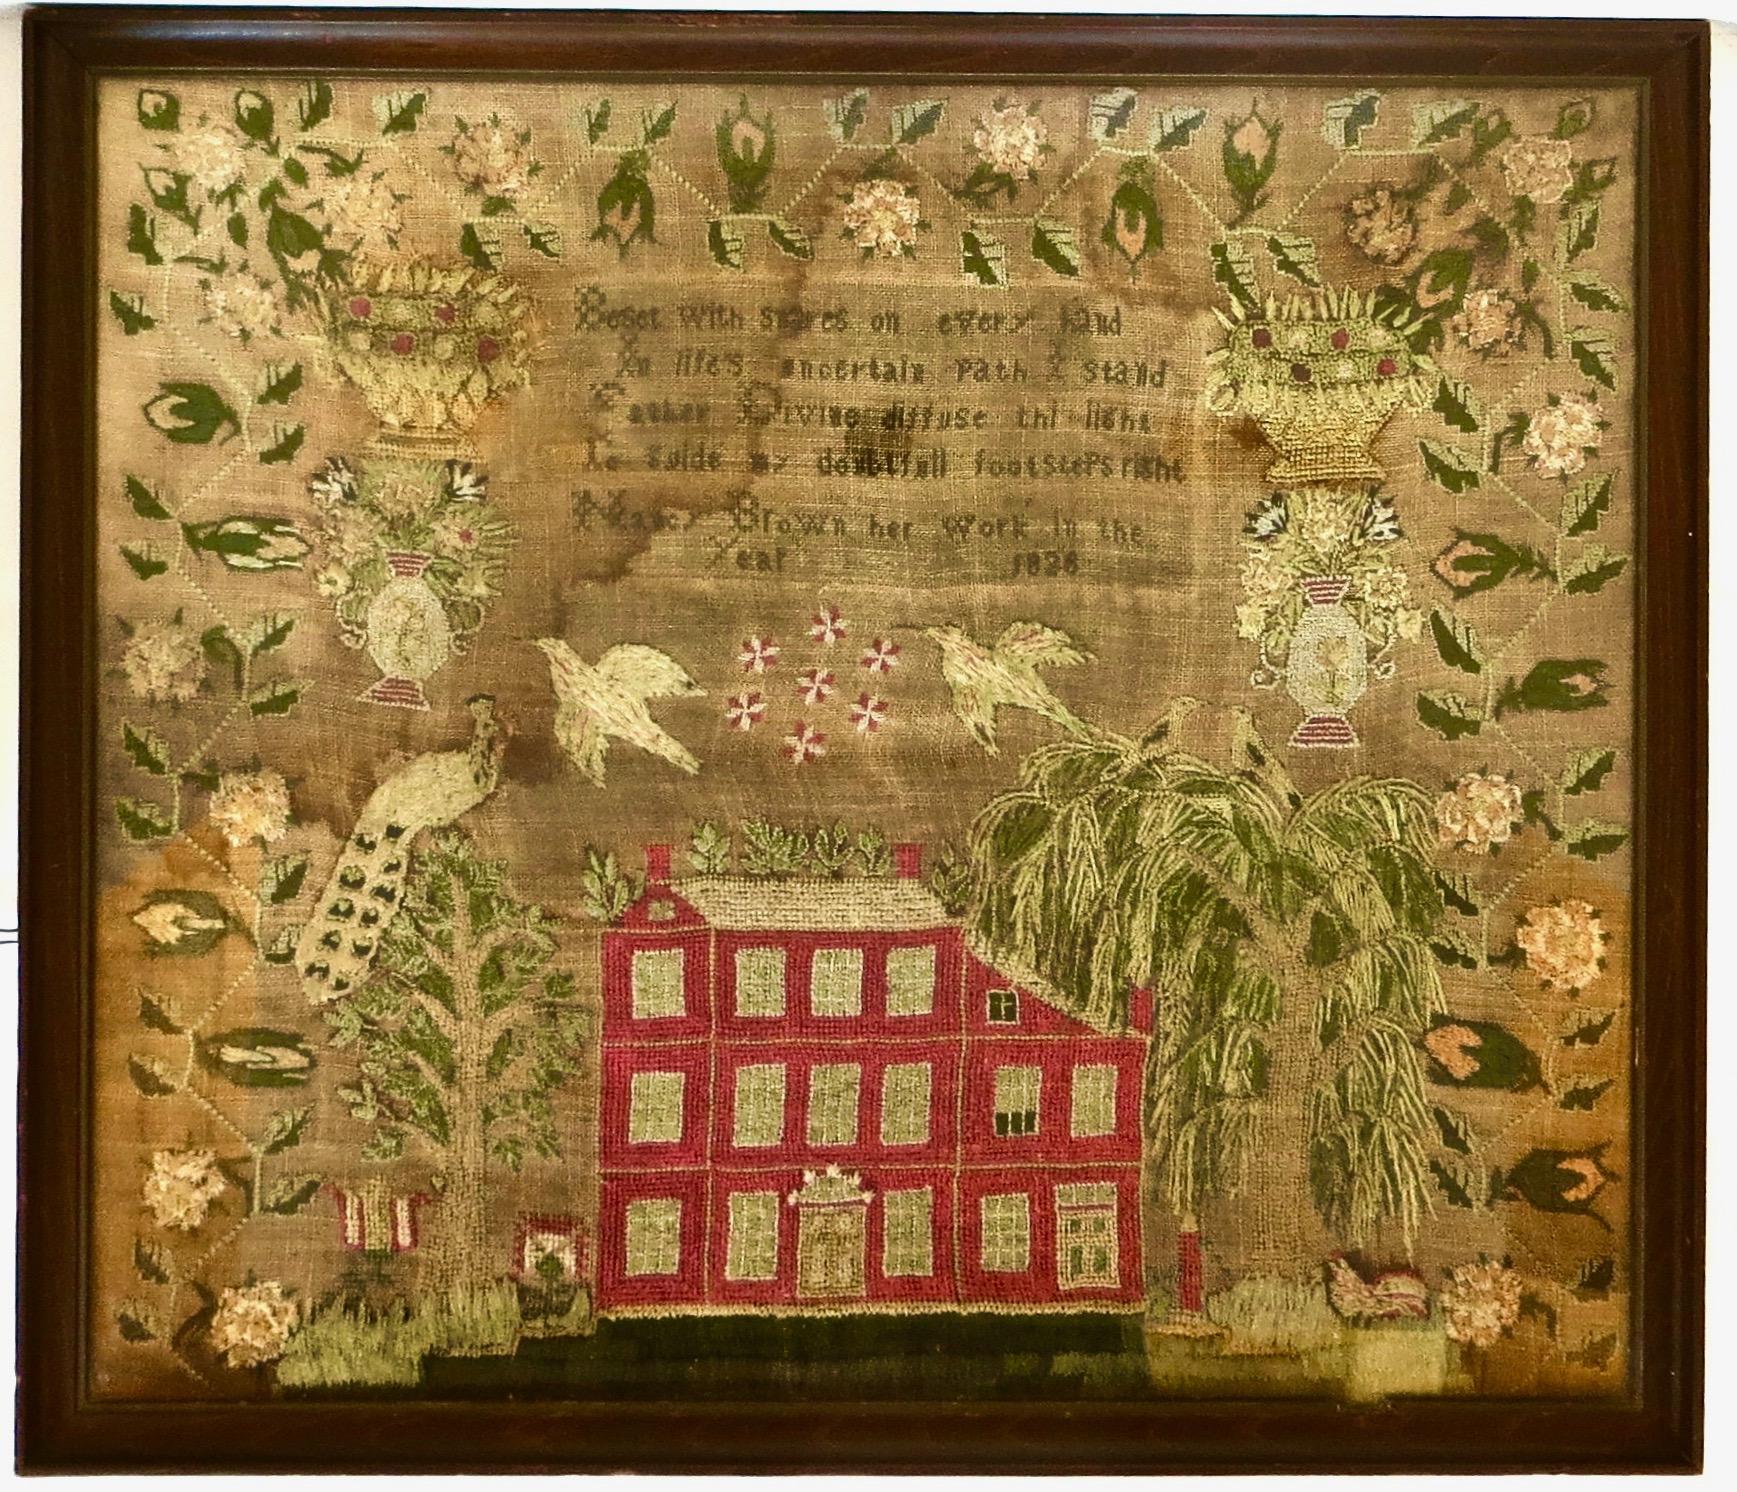 A very delightful and well done early American Children's Sampler, wrought by Nancy Brown in the year 1828. She has incorporated a proverb into her highly decorated sampler utilizing both needlepoint technique and embroidering skills, on a linen